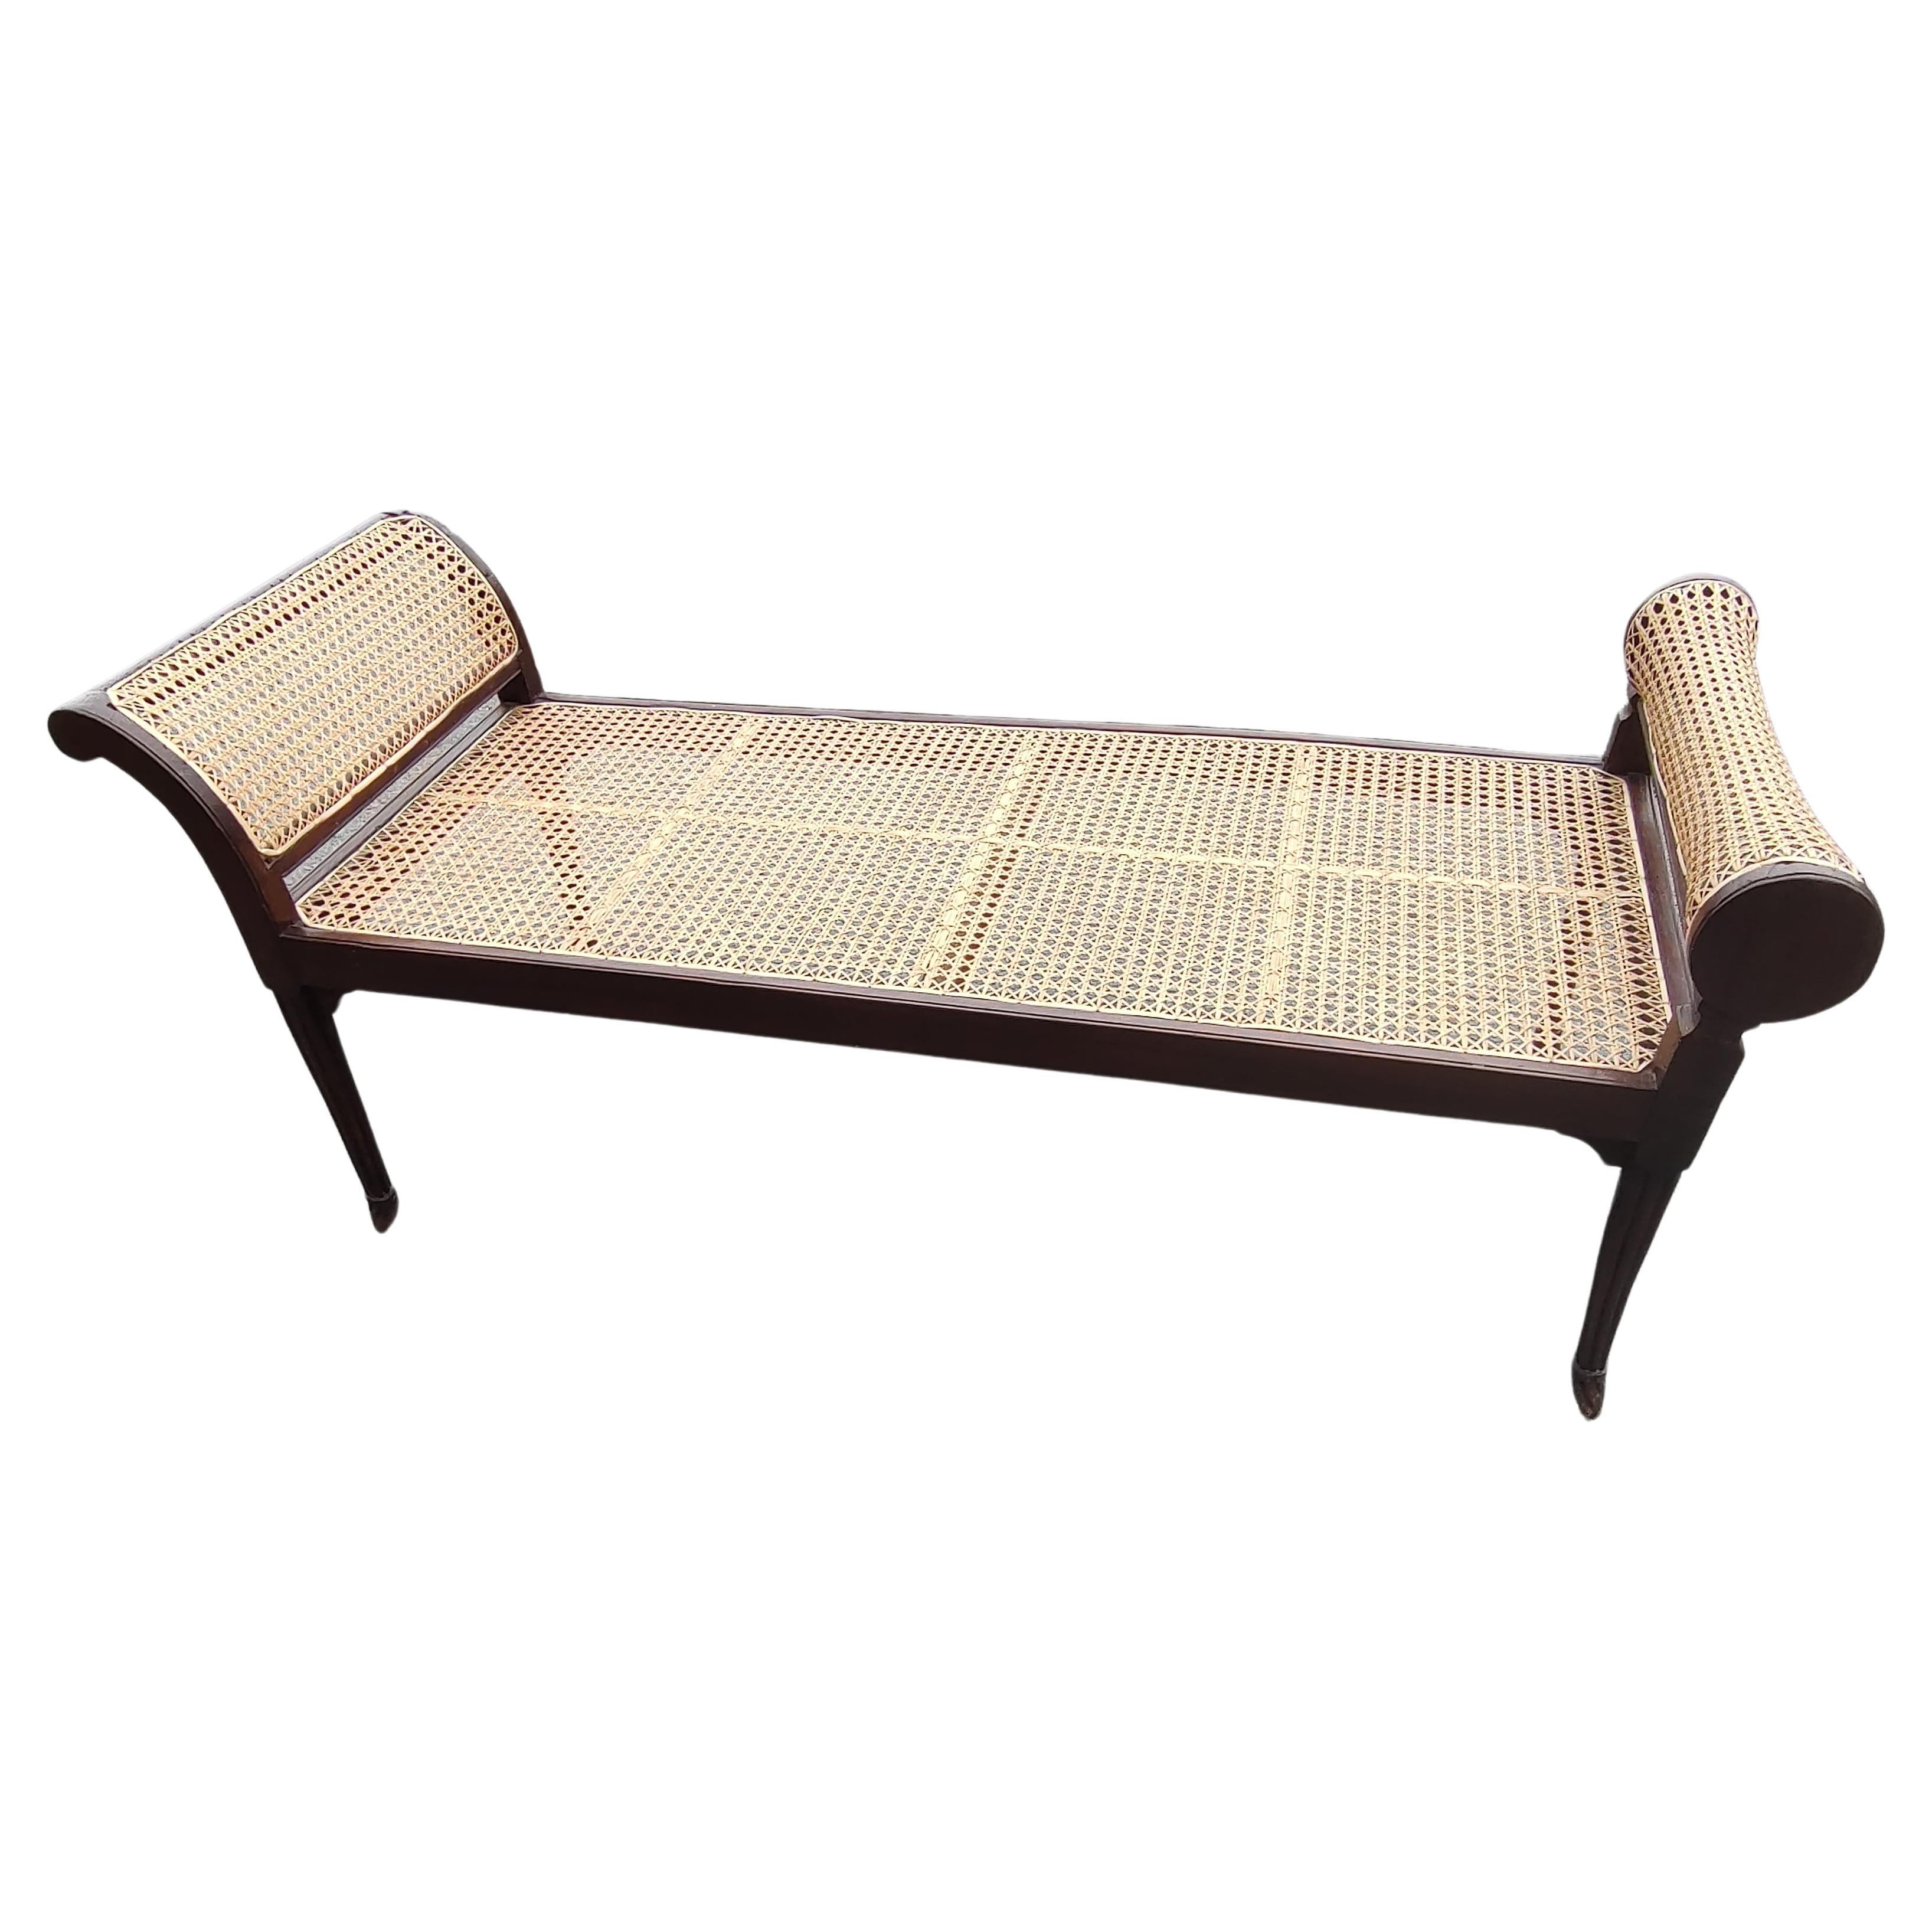 19thC English Regency Caned Recamier Style Window Seat with Reeded legs Mahogany For Sale